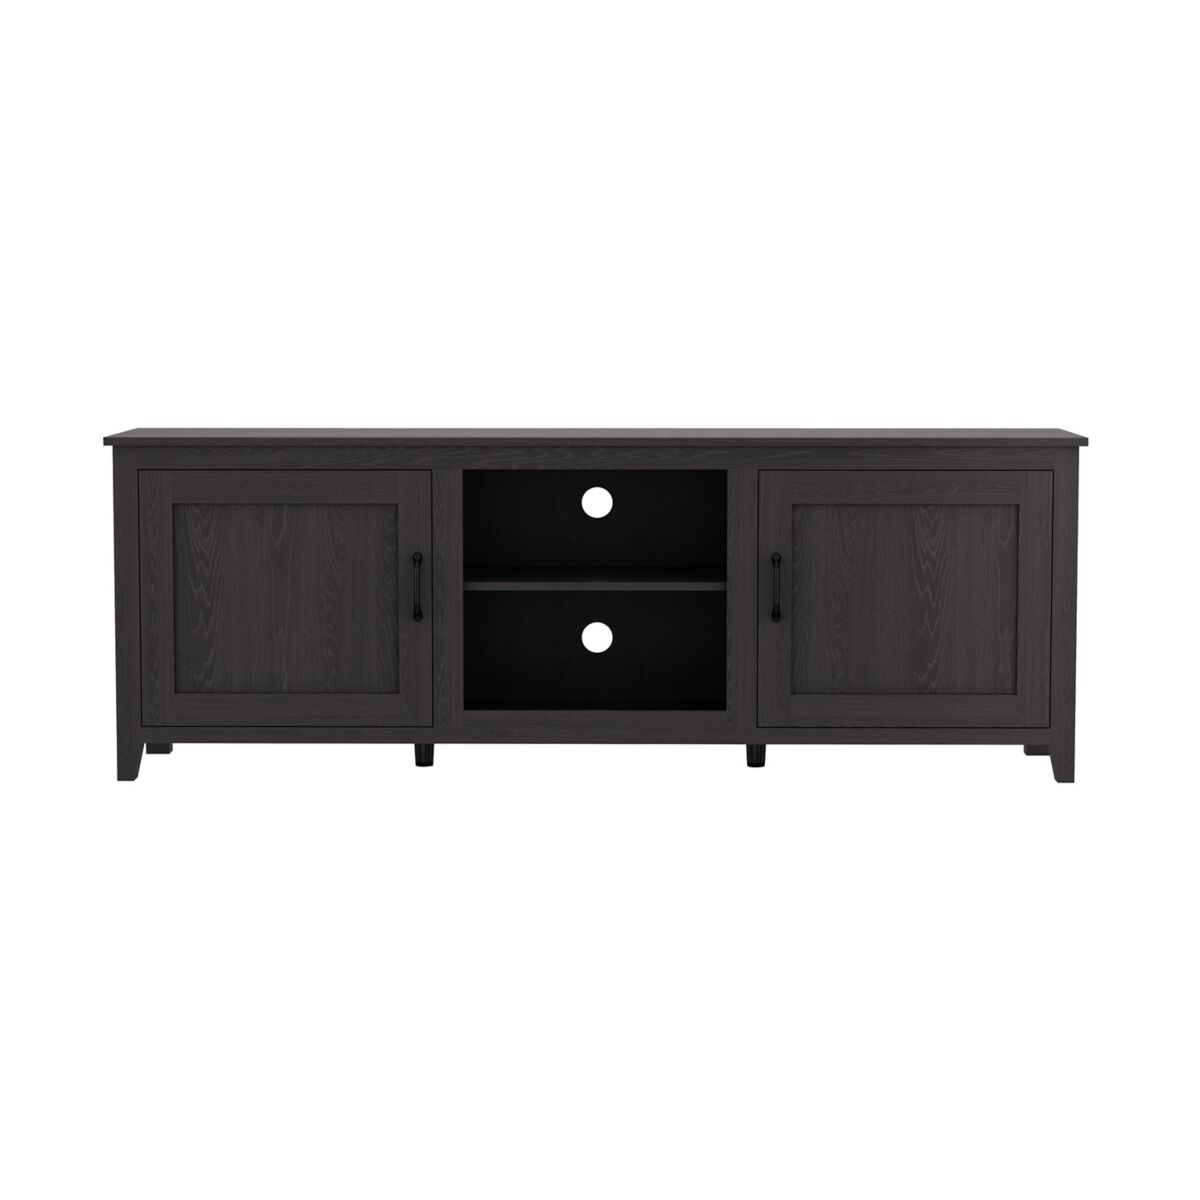 Simplie Fun Tv Stand Storage Media Console Entertainment Center, Tradition Black, with doors - Black